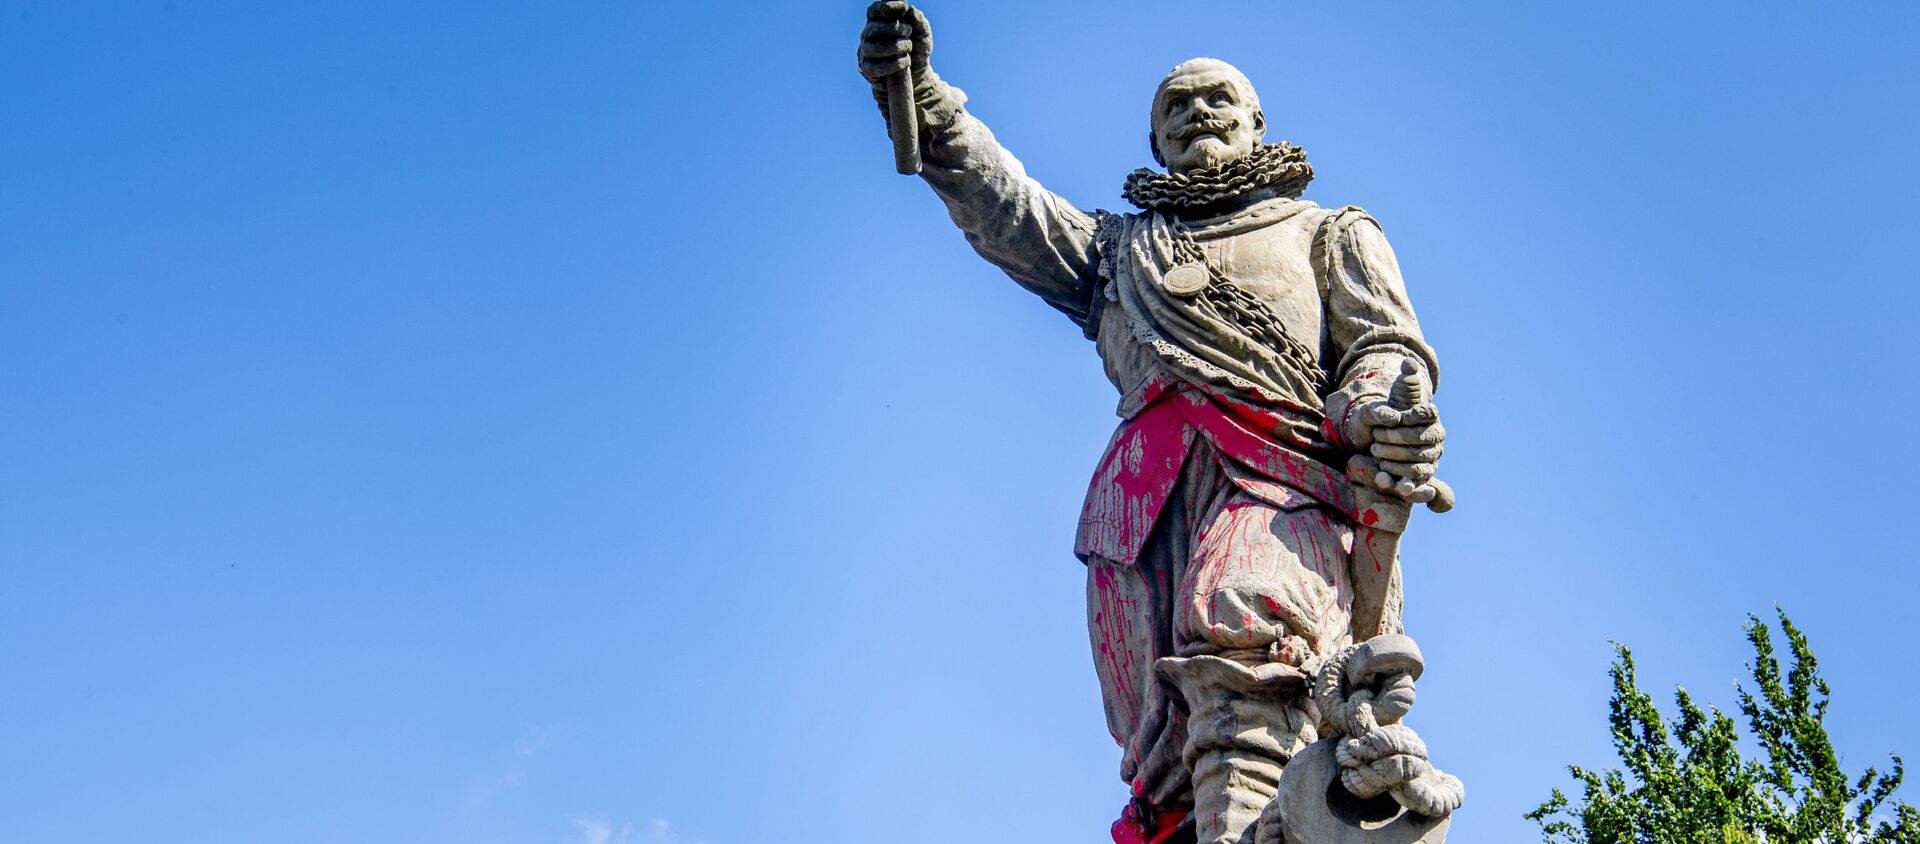 The statue of Dutch lieutenant admiral and commander of the West India Company Piet Hein in Rotterdam-Delfshaven is daubed and smeared with red paint (unseen)on June 12, 2020. - Dutch protesters on June 12, 2020, damaged the statues of a colonialist naval commander linked to the slave trade and of a murdered far-right politician, in the latest incidents targeting statues in Europe and the United States. The statue of Piet Hein -- a 17th-century admiral linked to the Dutch West India Trading Company who is regarded as one of the Netherlands' greatest naval heroes -- was sprayed with the words killer and thief overnight in Rotterdam.  - Sputnik International, 1920, 12.06.2020